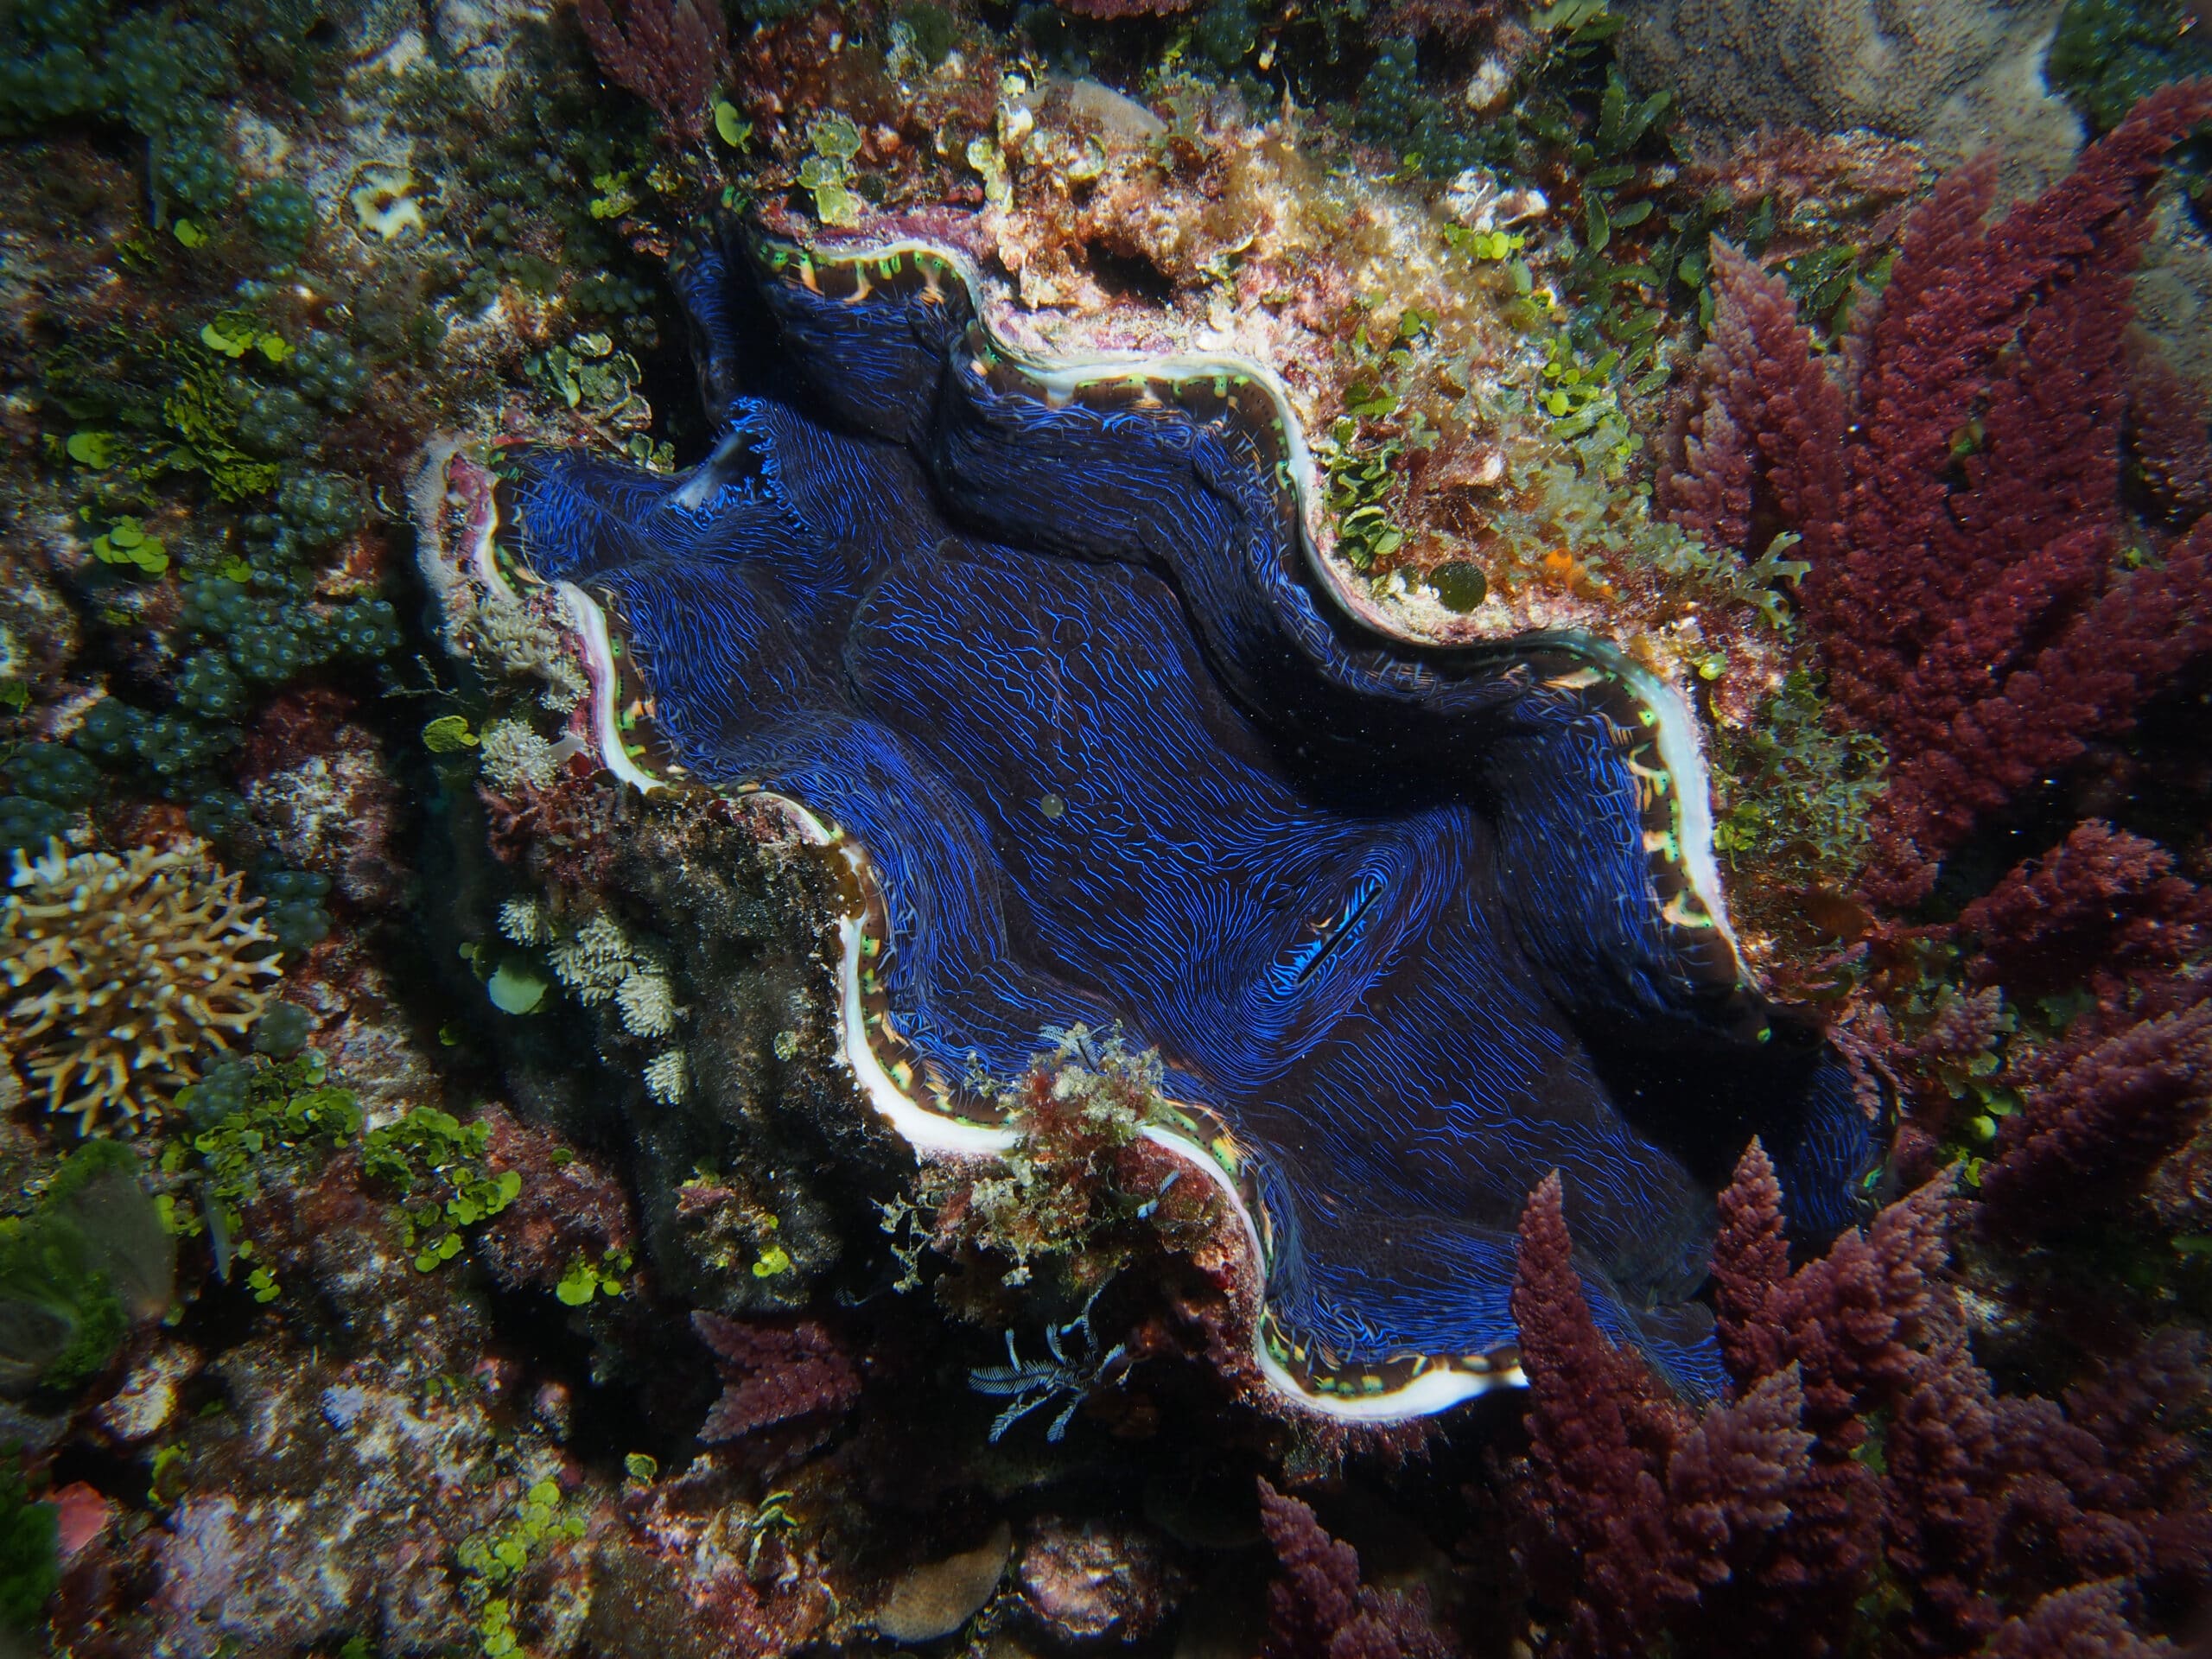 giant clam scientific name, considerable deal 62% off 